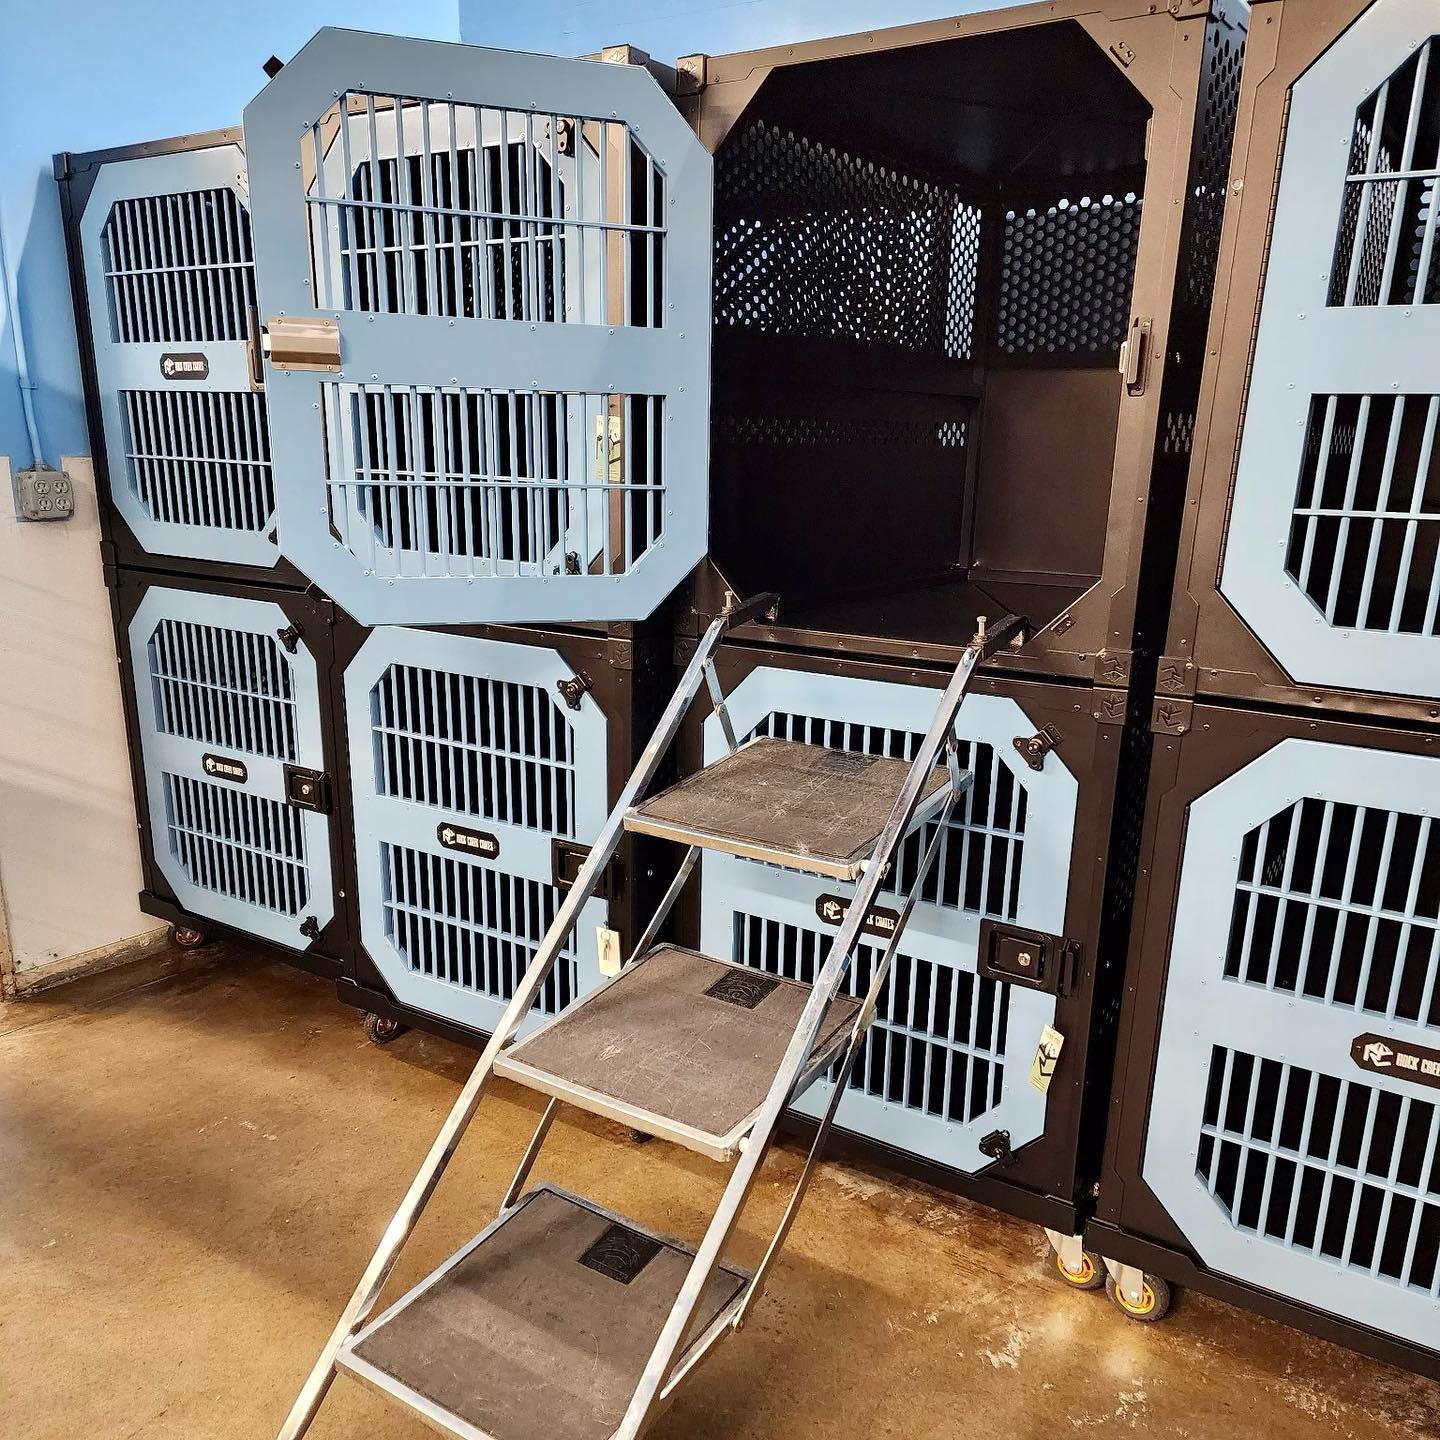 Rock Creek Crates professional bank for dog crates, stacked